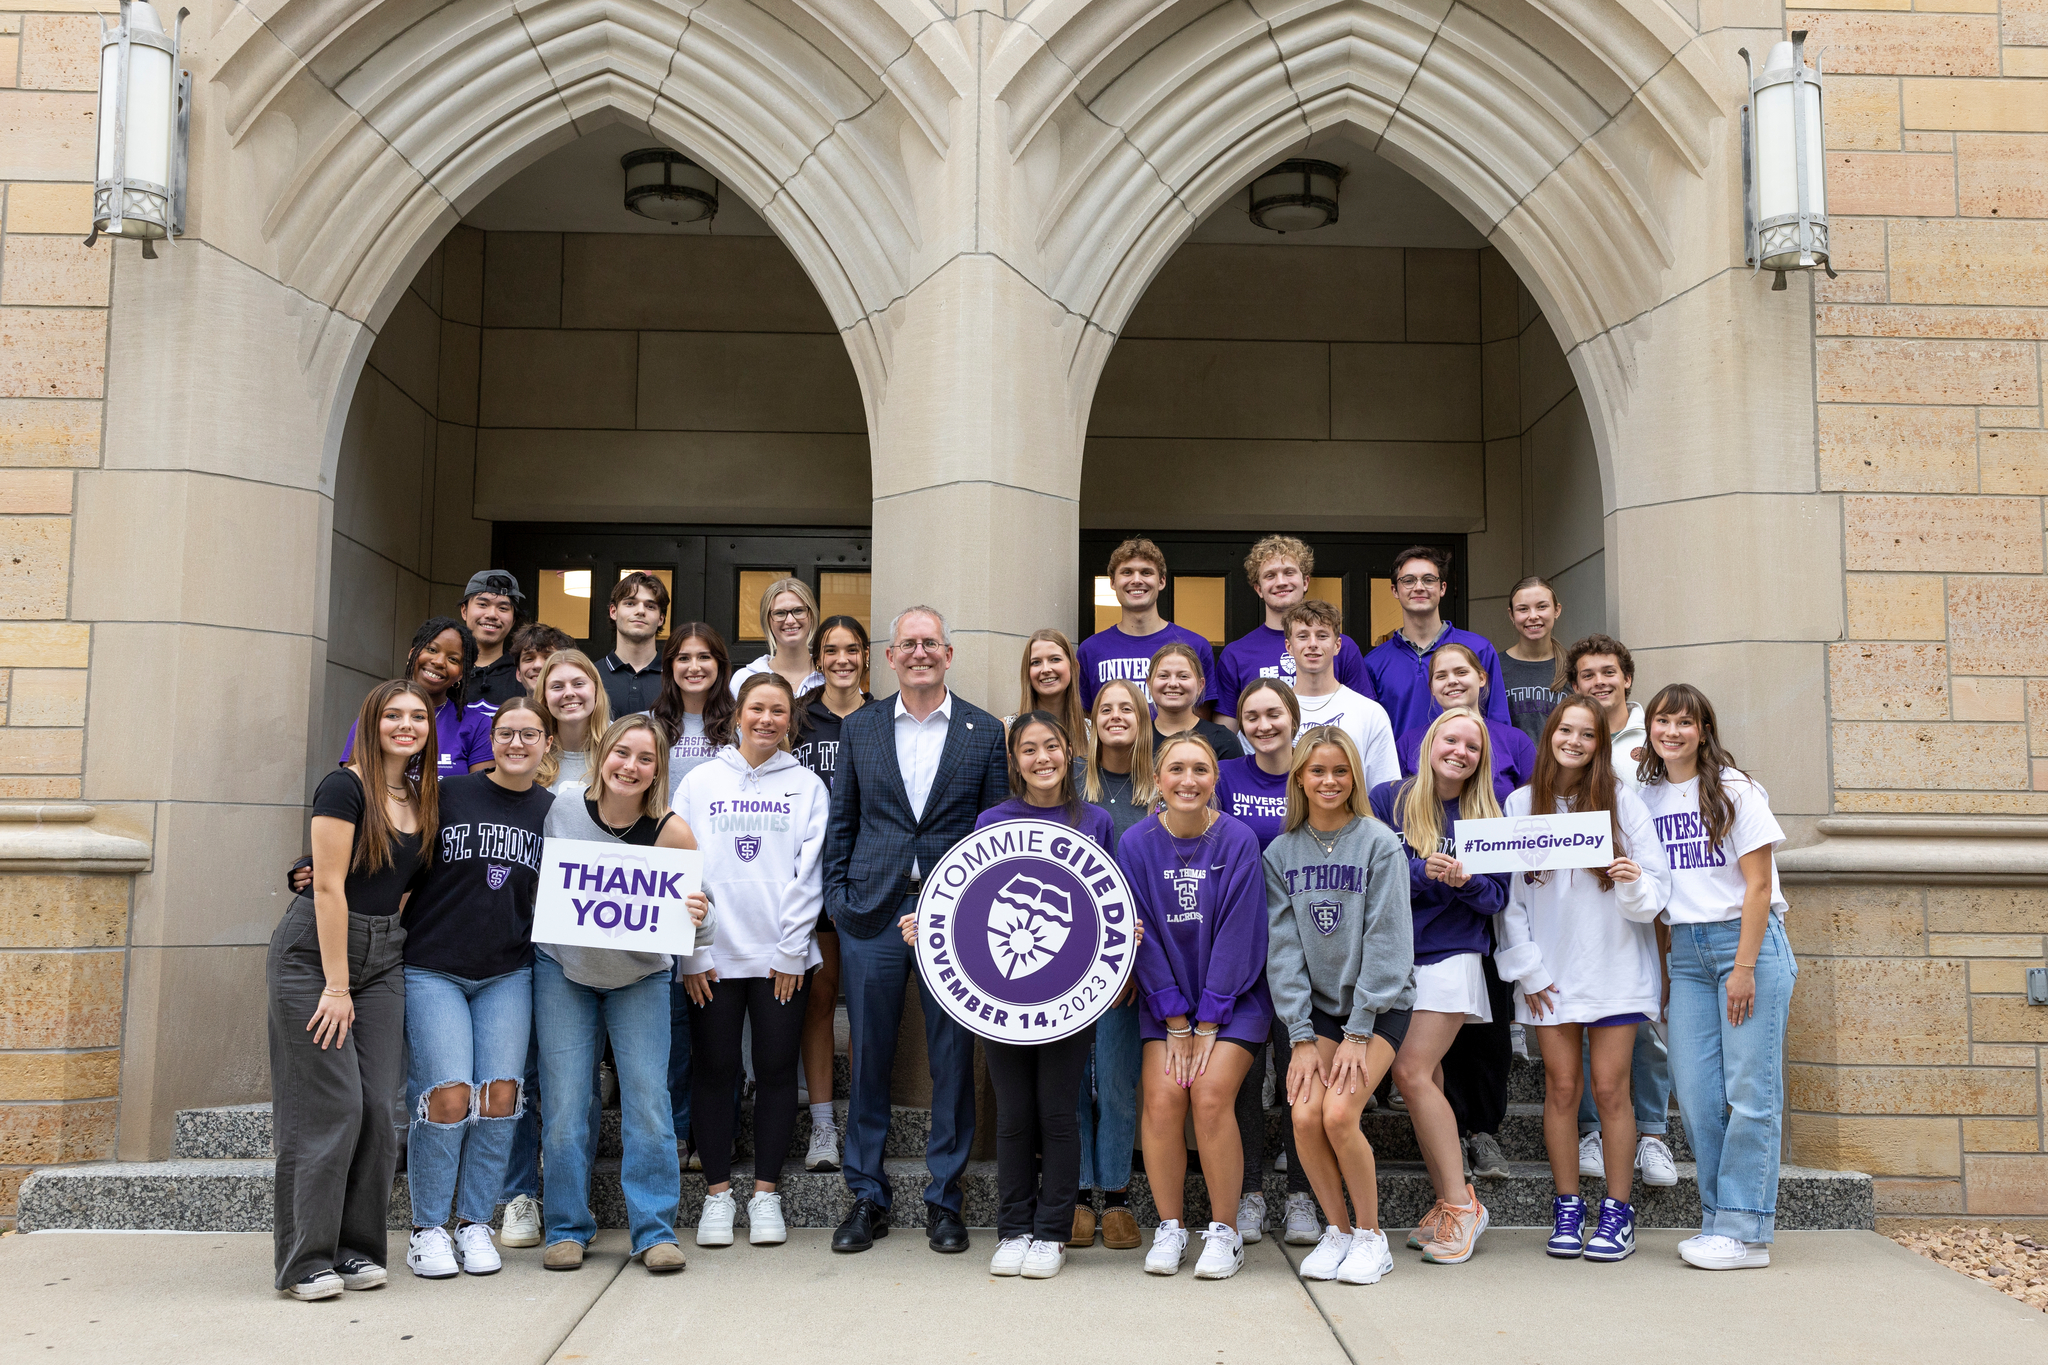 Group of 20 Tommie students in purple holding a Tommie Give Day flag